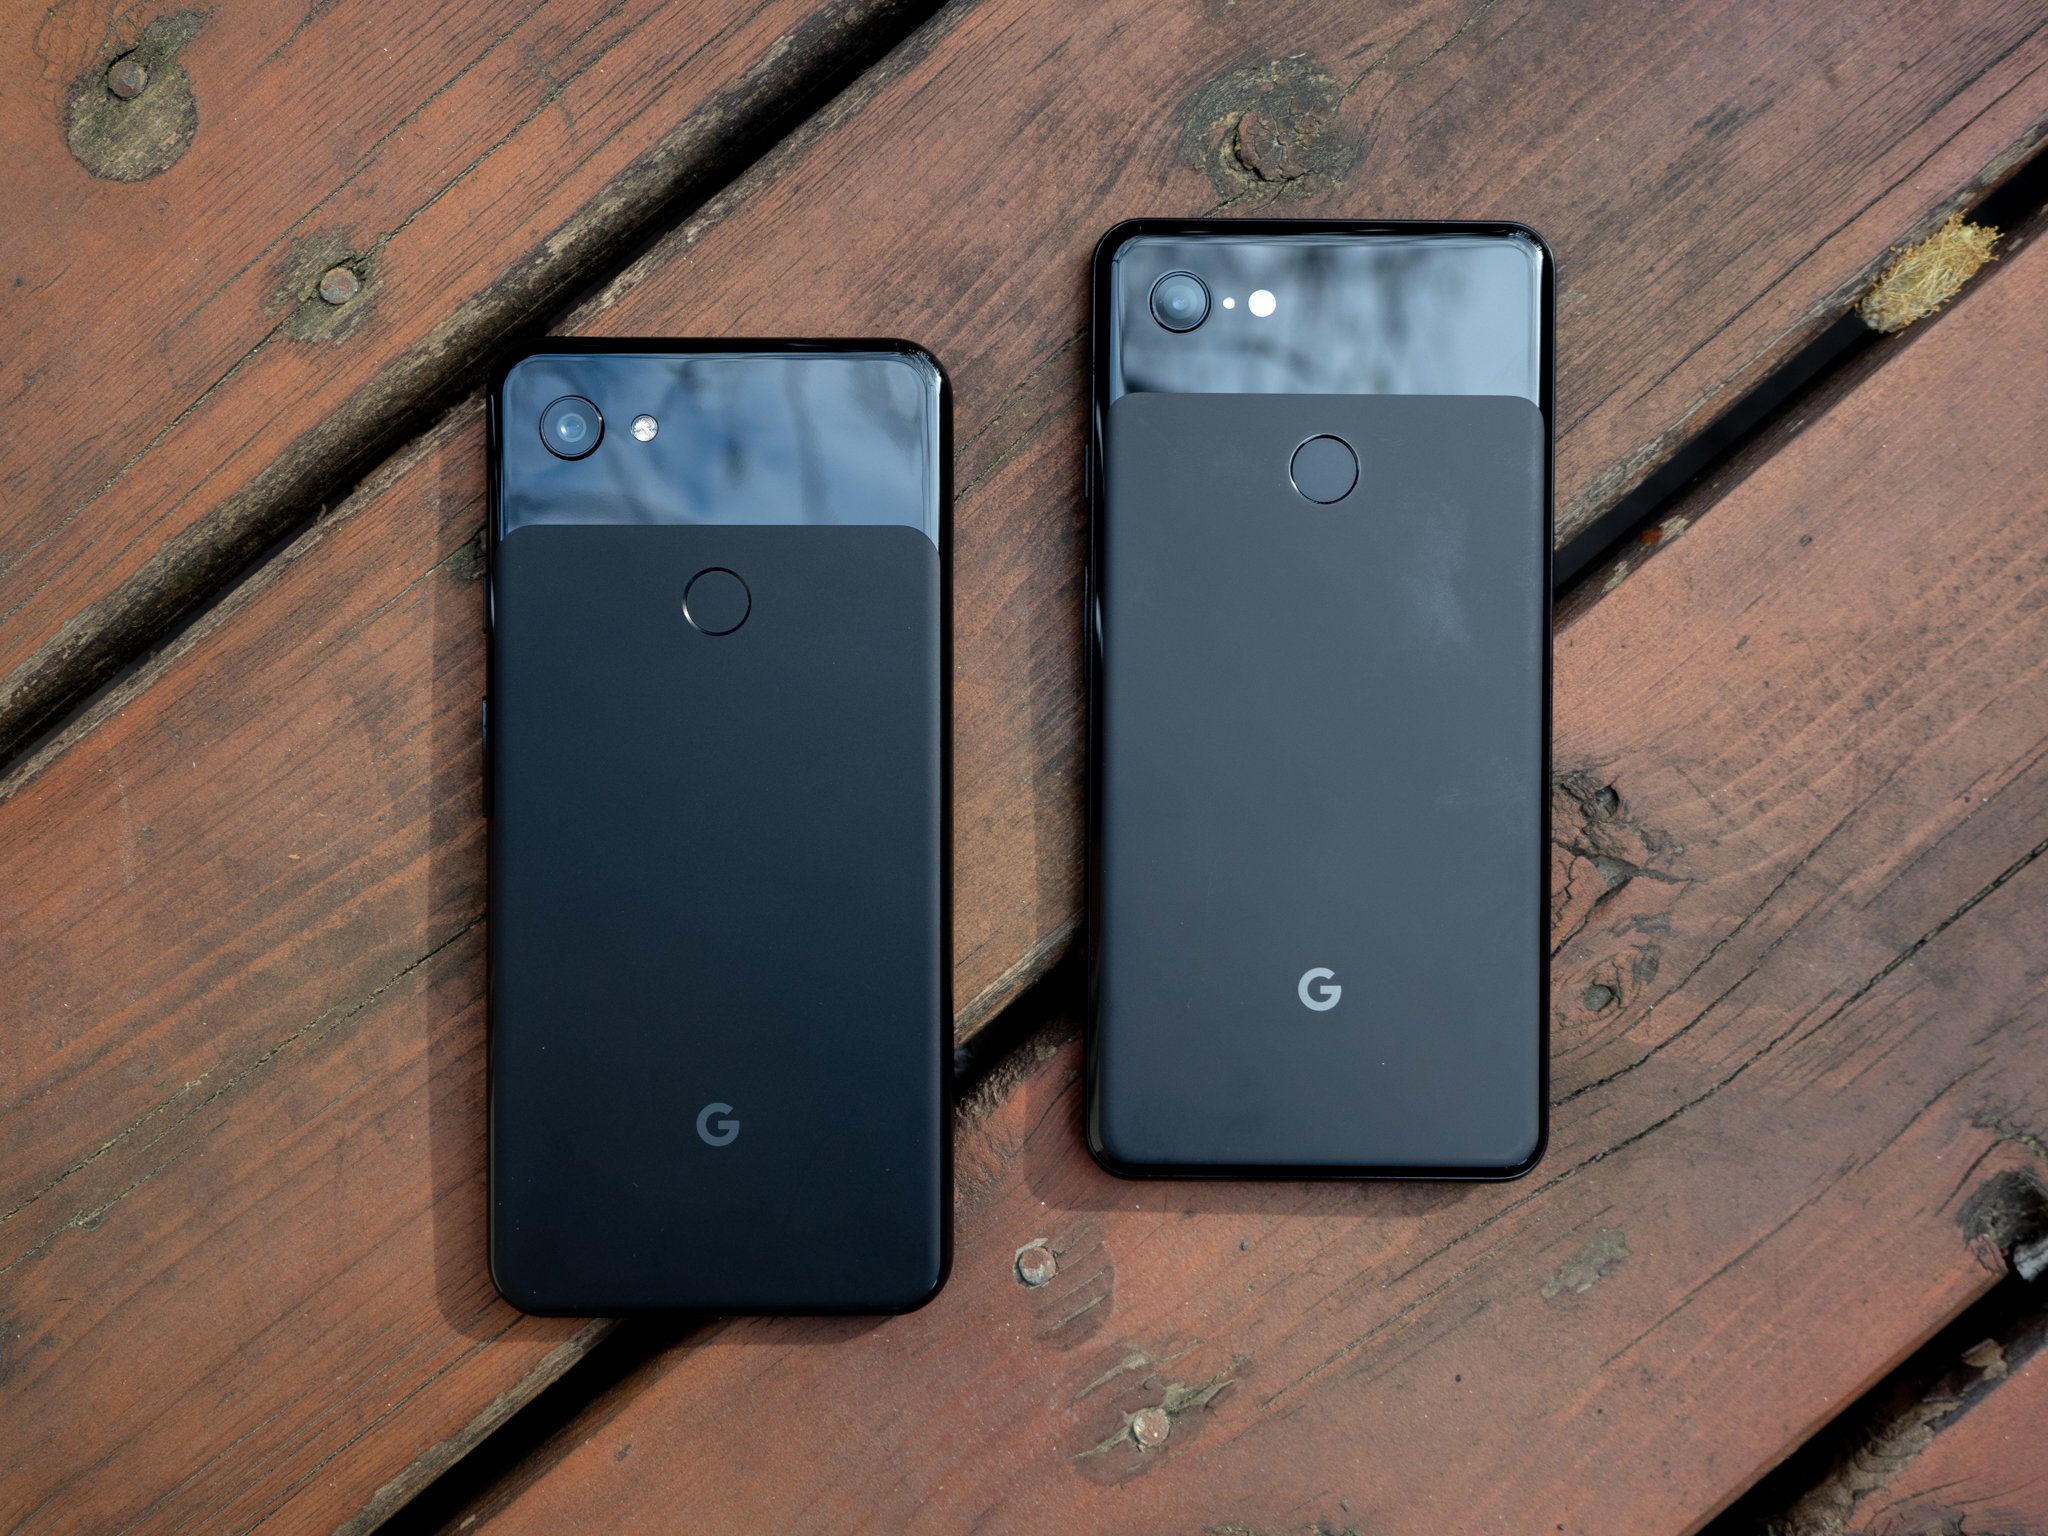 https://www.androidcentral.com/sites/androidcentral.com/files/styles/large_wm_brw/public/article_images/2019/05/google-pixel-3a-xl-vs-3-xl-1.jpg?itok=98AWwNd_